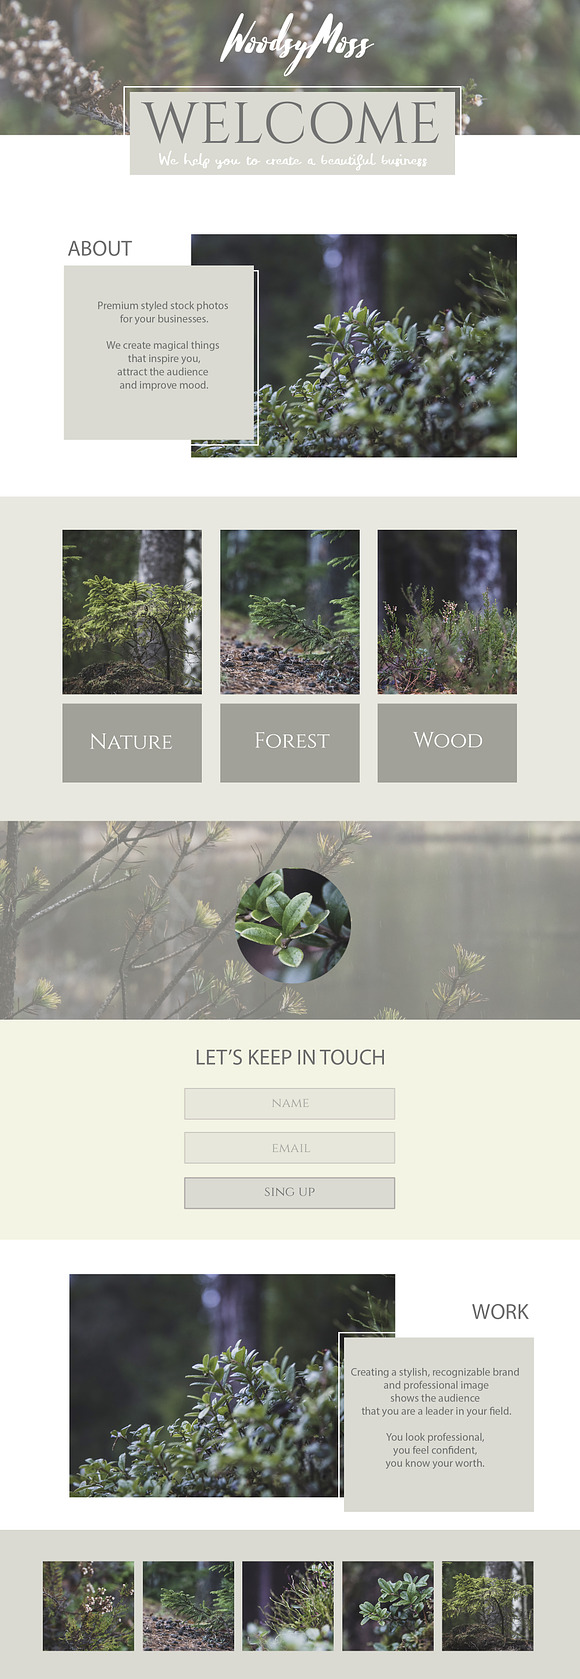 Shrubbery - Stock Photos in Social Media Templates - product preview 5